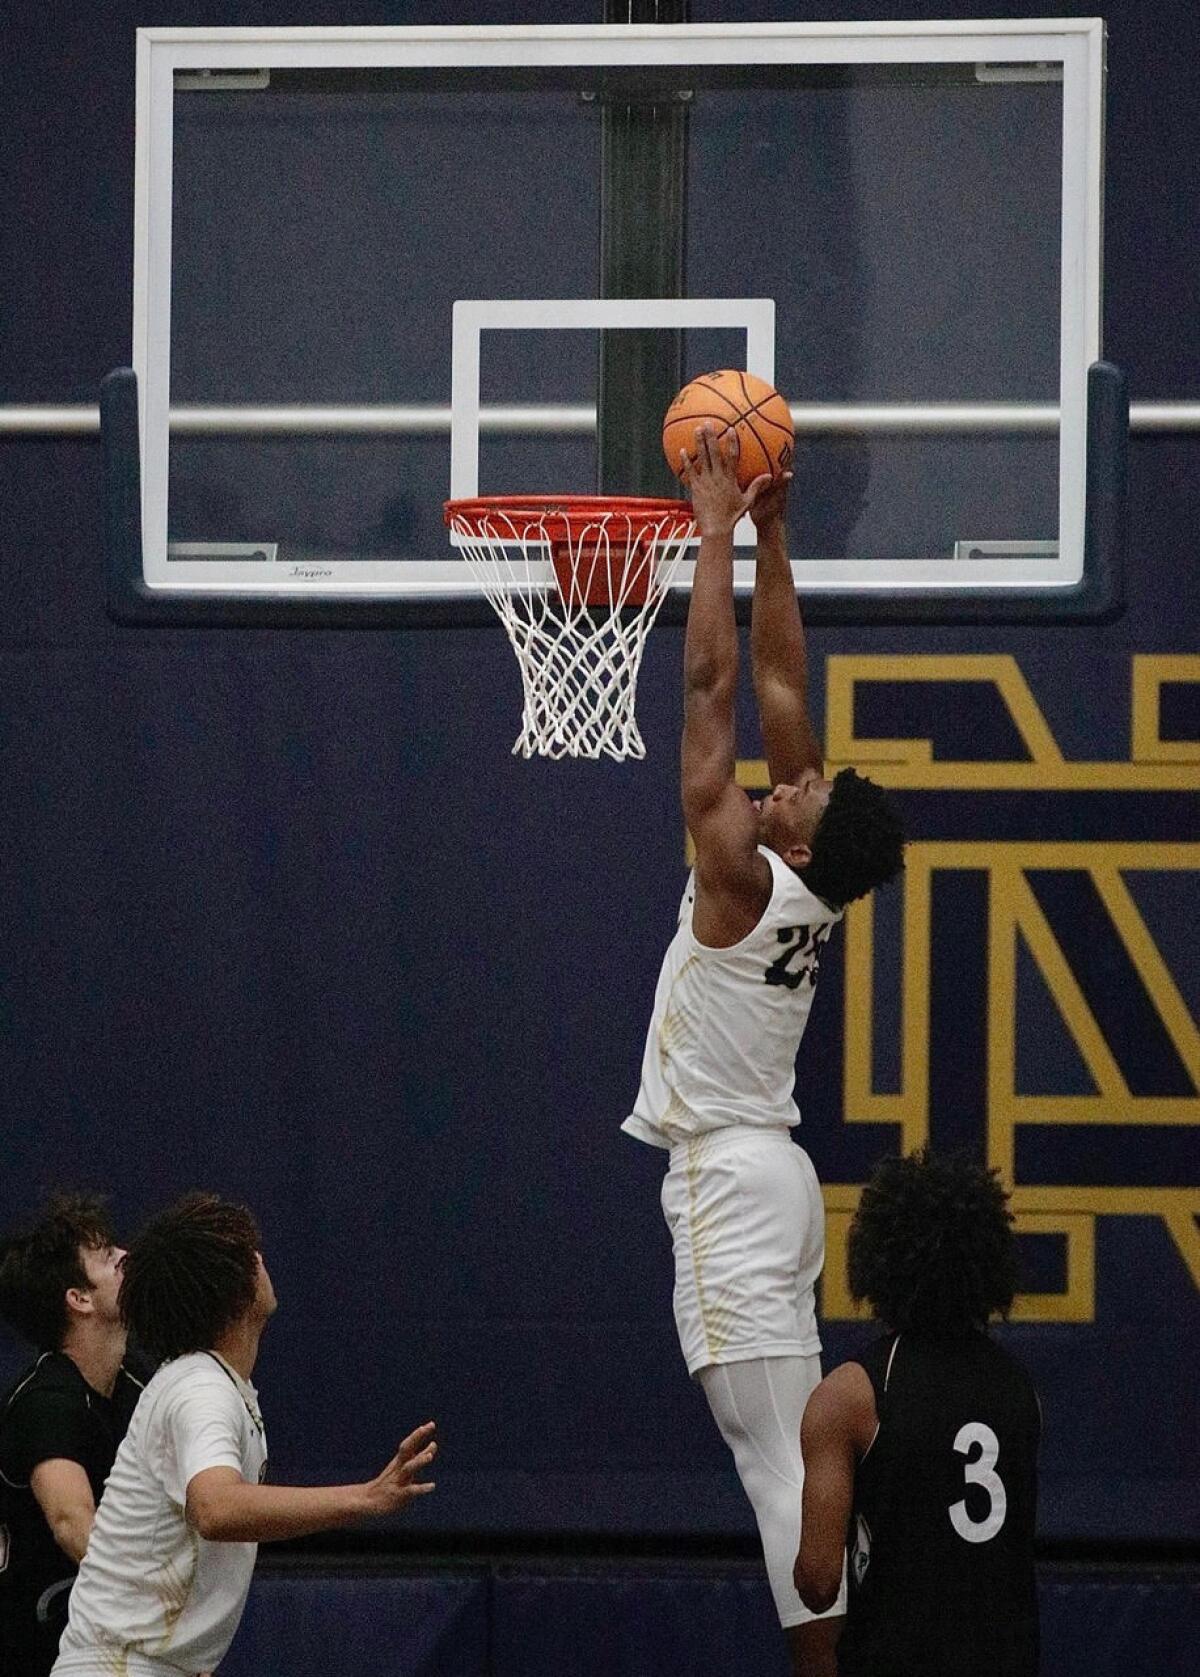 Mercy Miller of Sherman Oaks Notre Dame delivers a dunk. He finished with 33 points against Palisades.